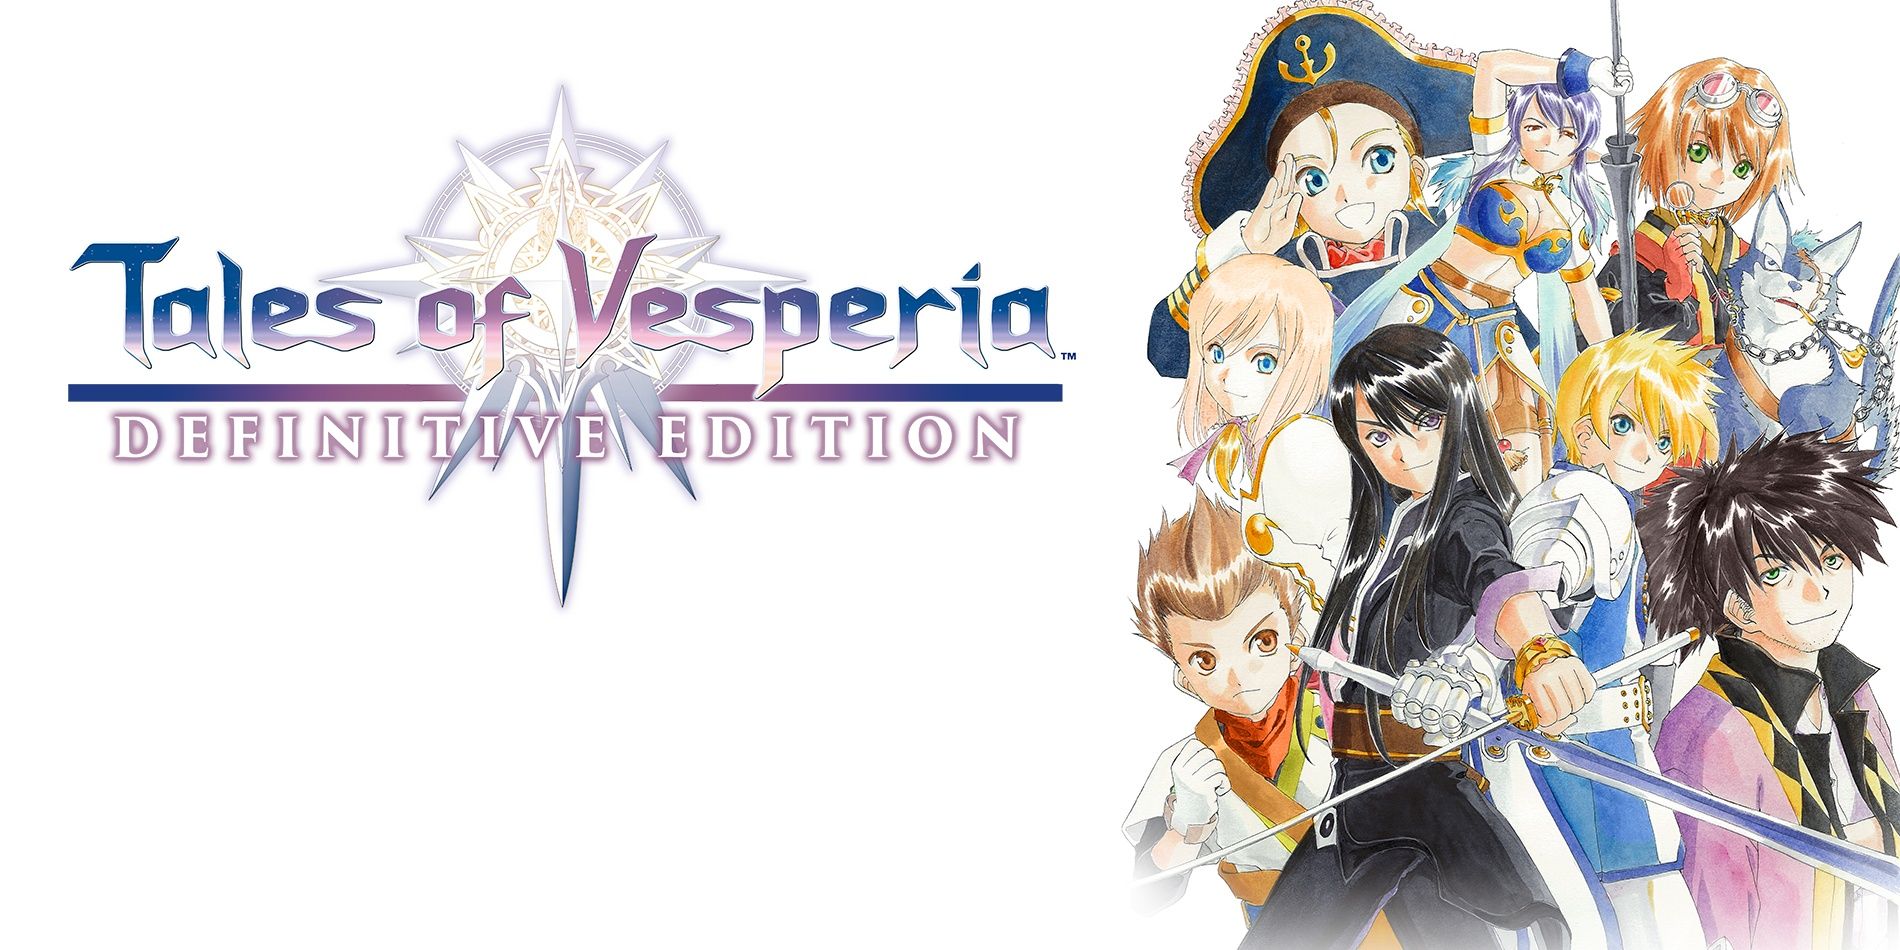 Tales of Vesperia Definitive Edition official promo image showing the cast